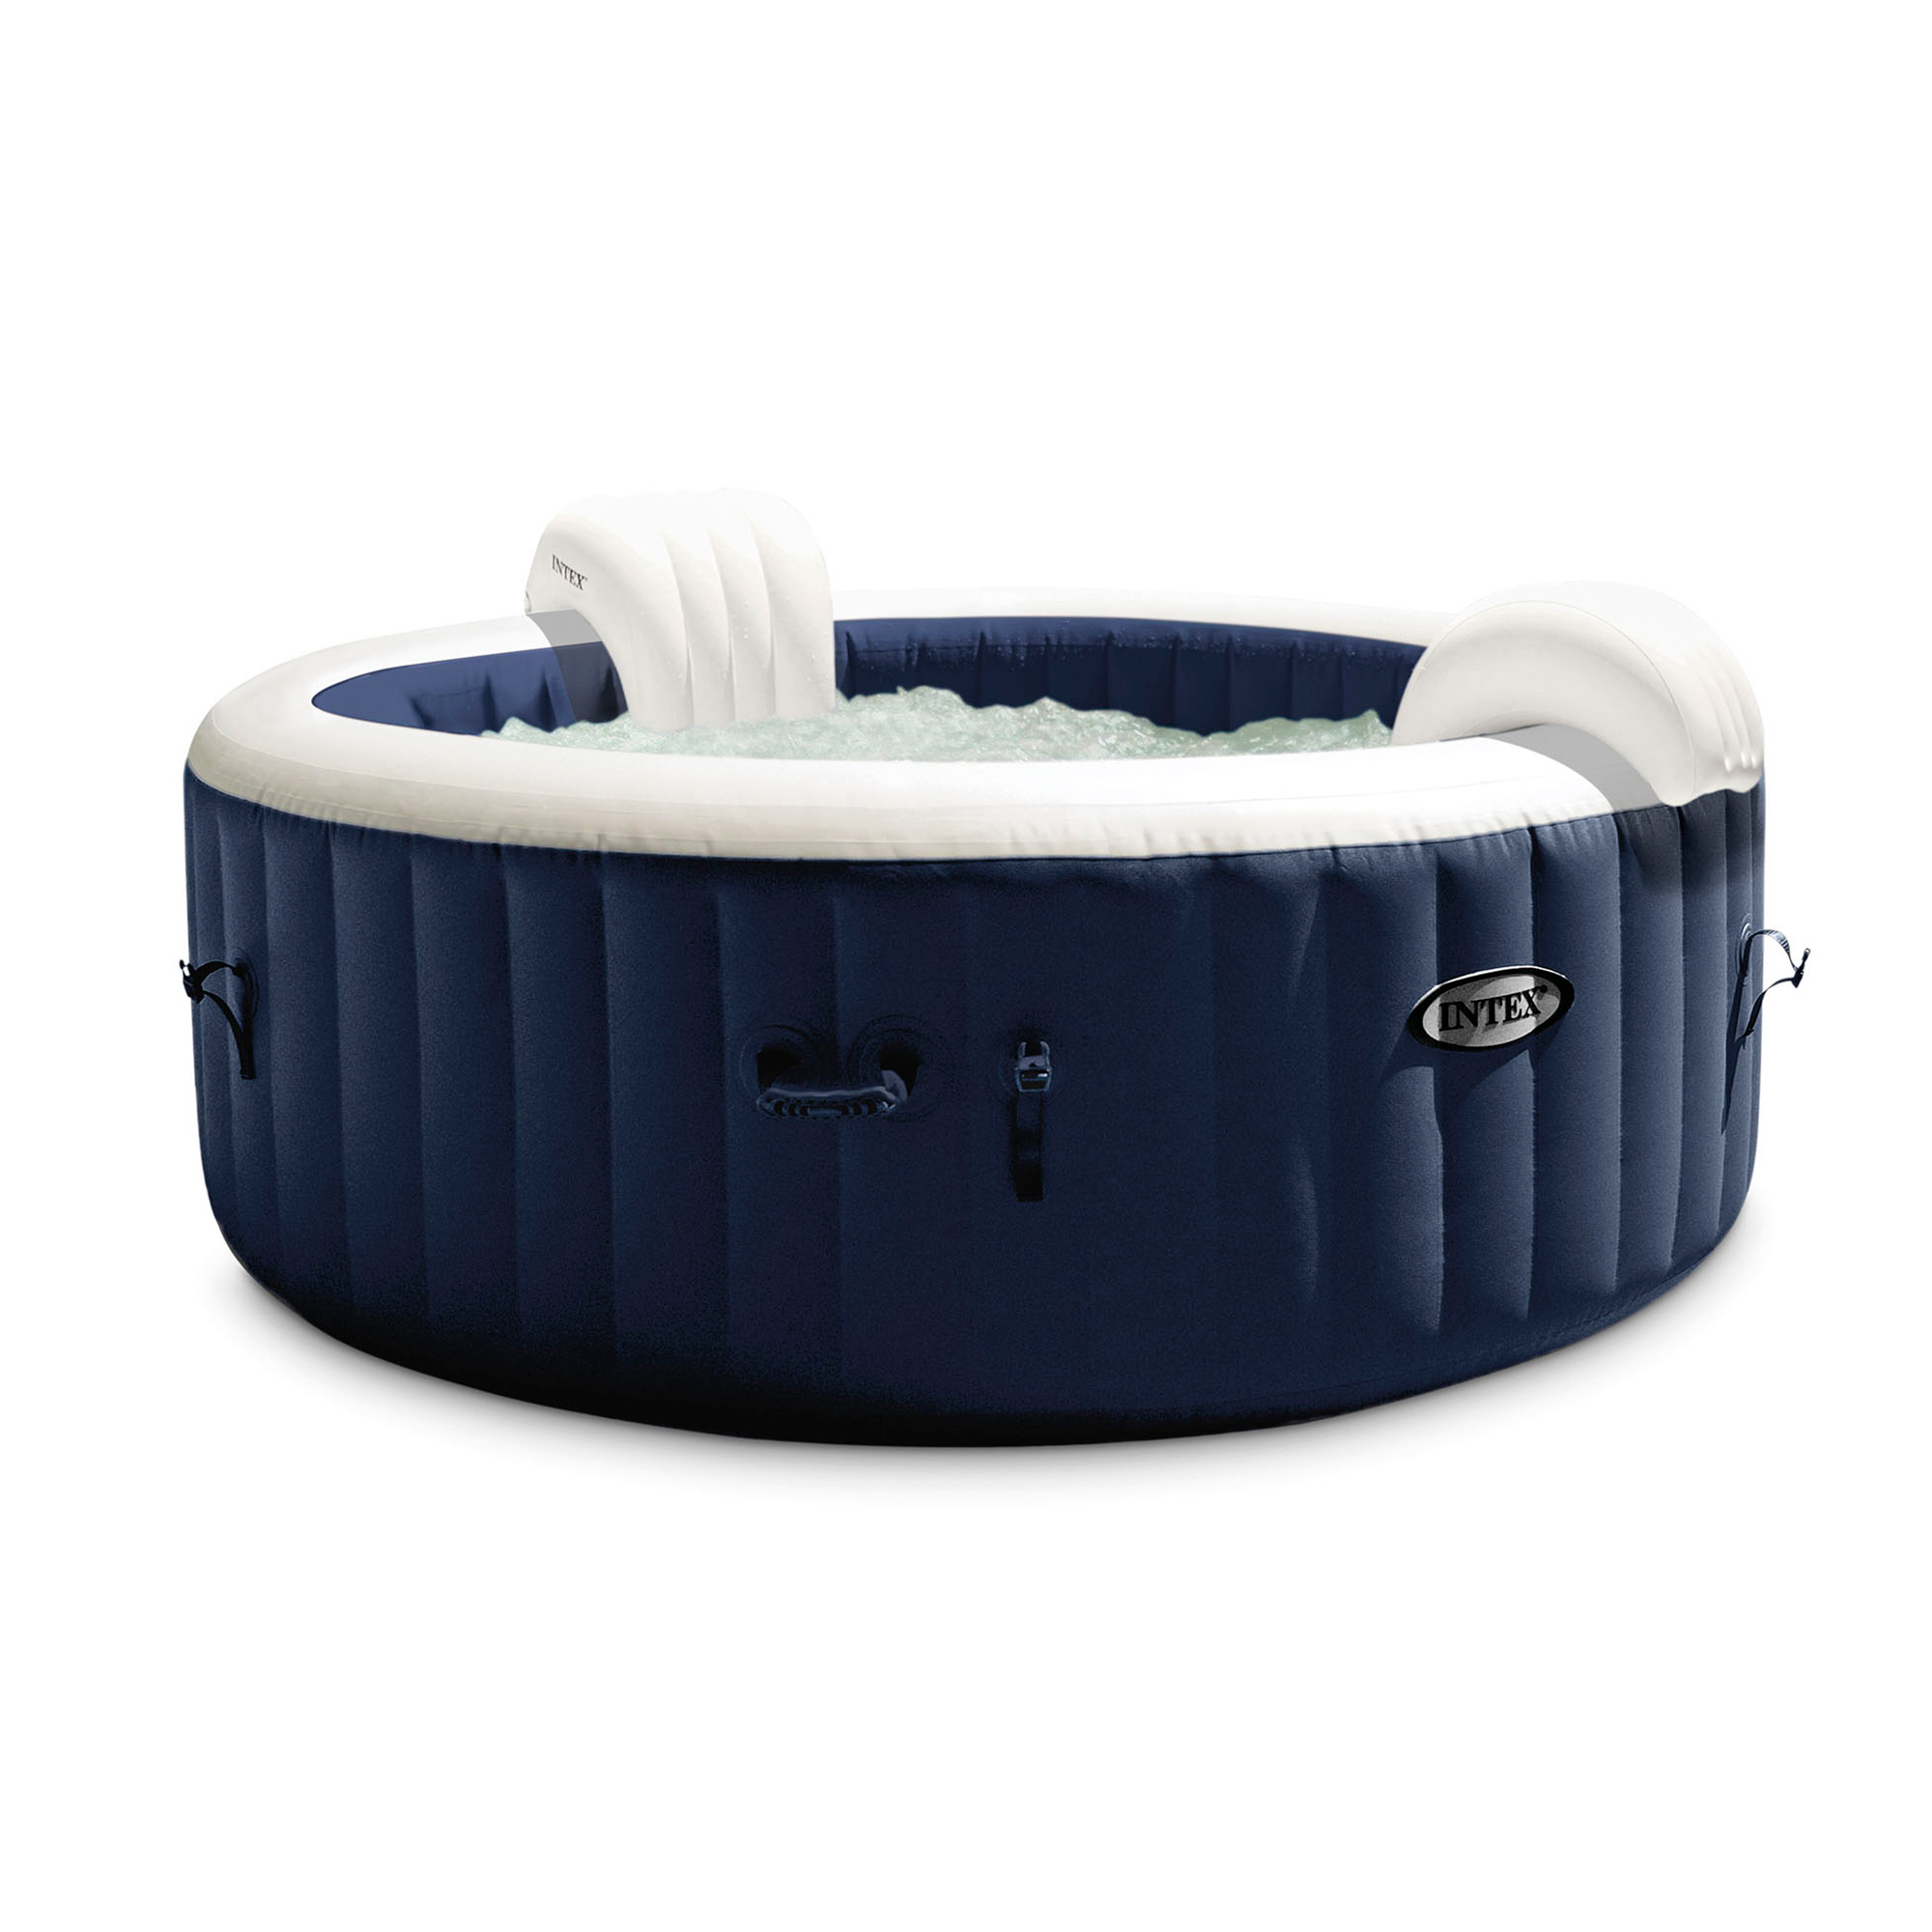 Intex PureSpa Plus 6 Person Inflatable Hot Tub Bubble Jet Spa w/ 2 Seats, Navy - image 2 of 12